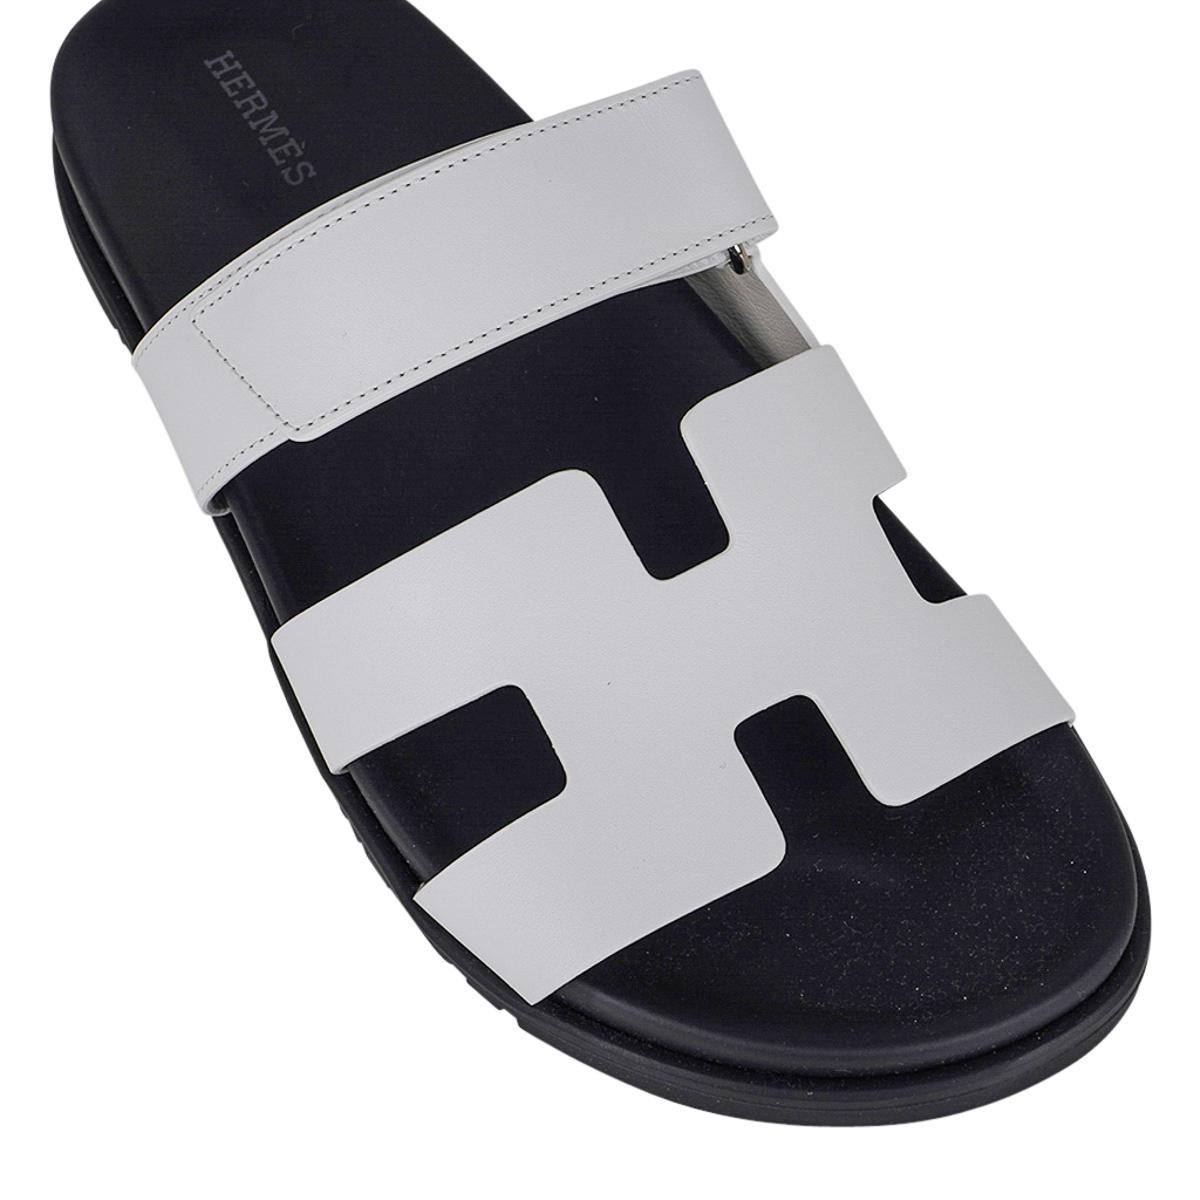 Mightychic offers a limited edition Hermes Chypre Sandal featured in White.
Calfskin with black anatomical insole and H embossed Black rubber sole.
Strap across foot is adjustable with velcro closure.
Comes with sleepers and and signature Hermes